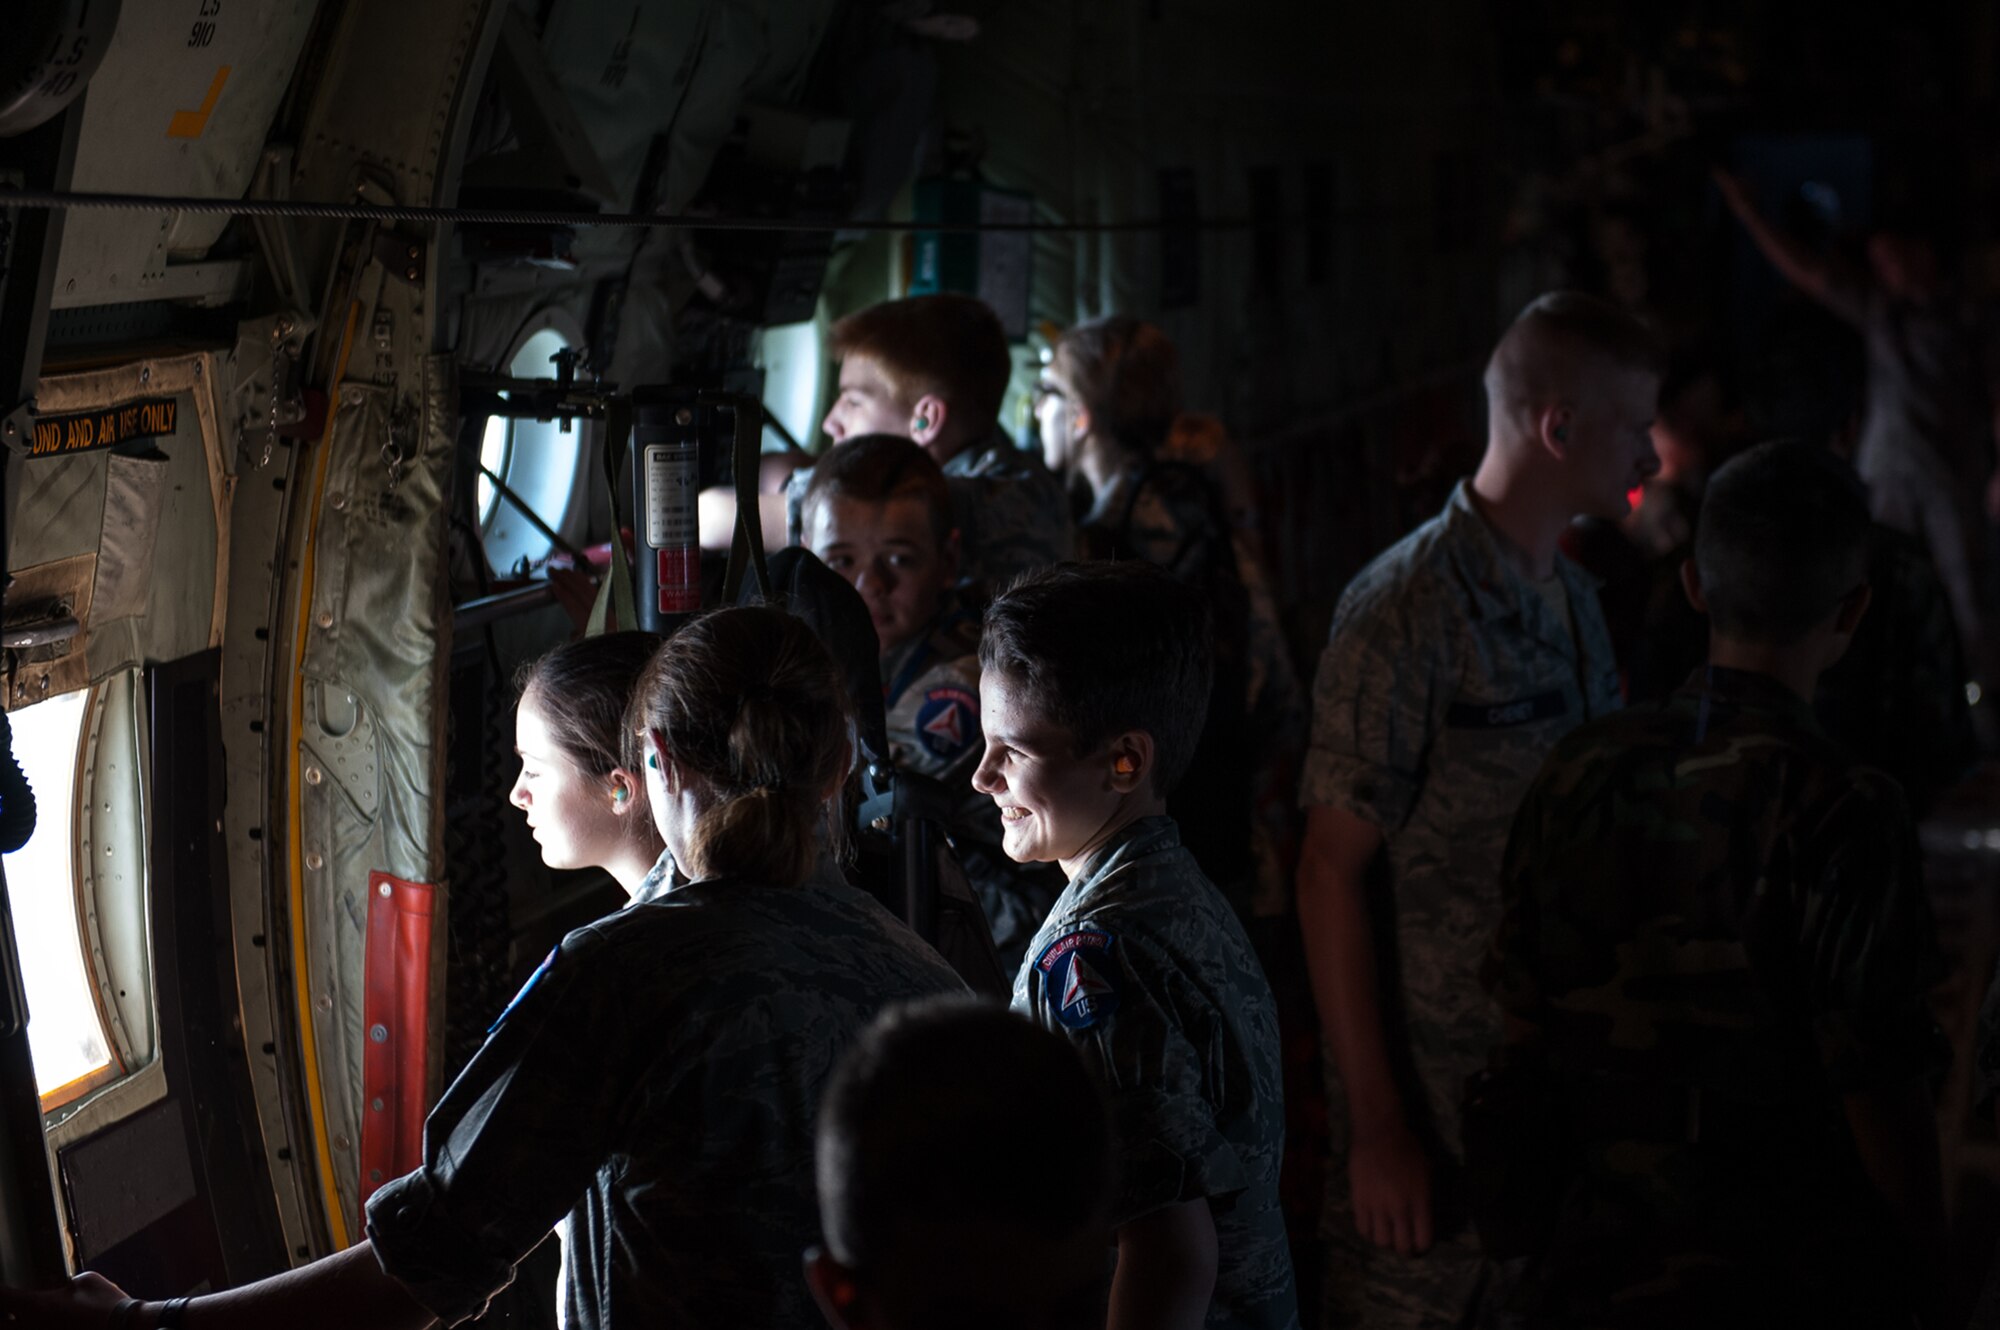 Civil Air Patrol cadets look out the windows of a C-130J Super Hercules assigned to the 37th Airlift Squadron on Ramstein Air Base, during a flight over Rheinland-Pfalz, Germany, June 20, 2017. The 37th AS conducted the flight so cadets could learn about the aircraft first-hand. (U.S. Air Force photo by Senior Airman Devin Boyer)